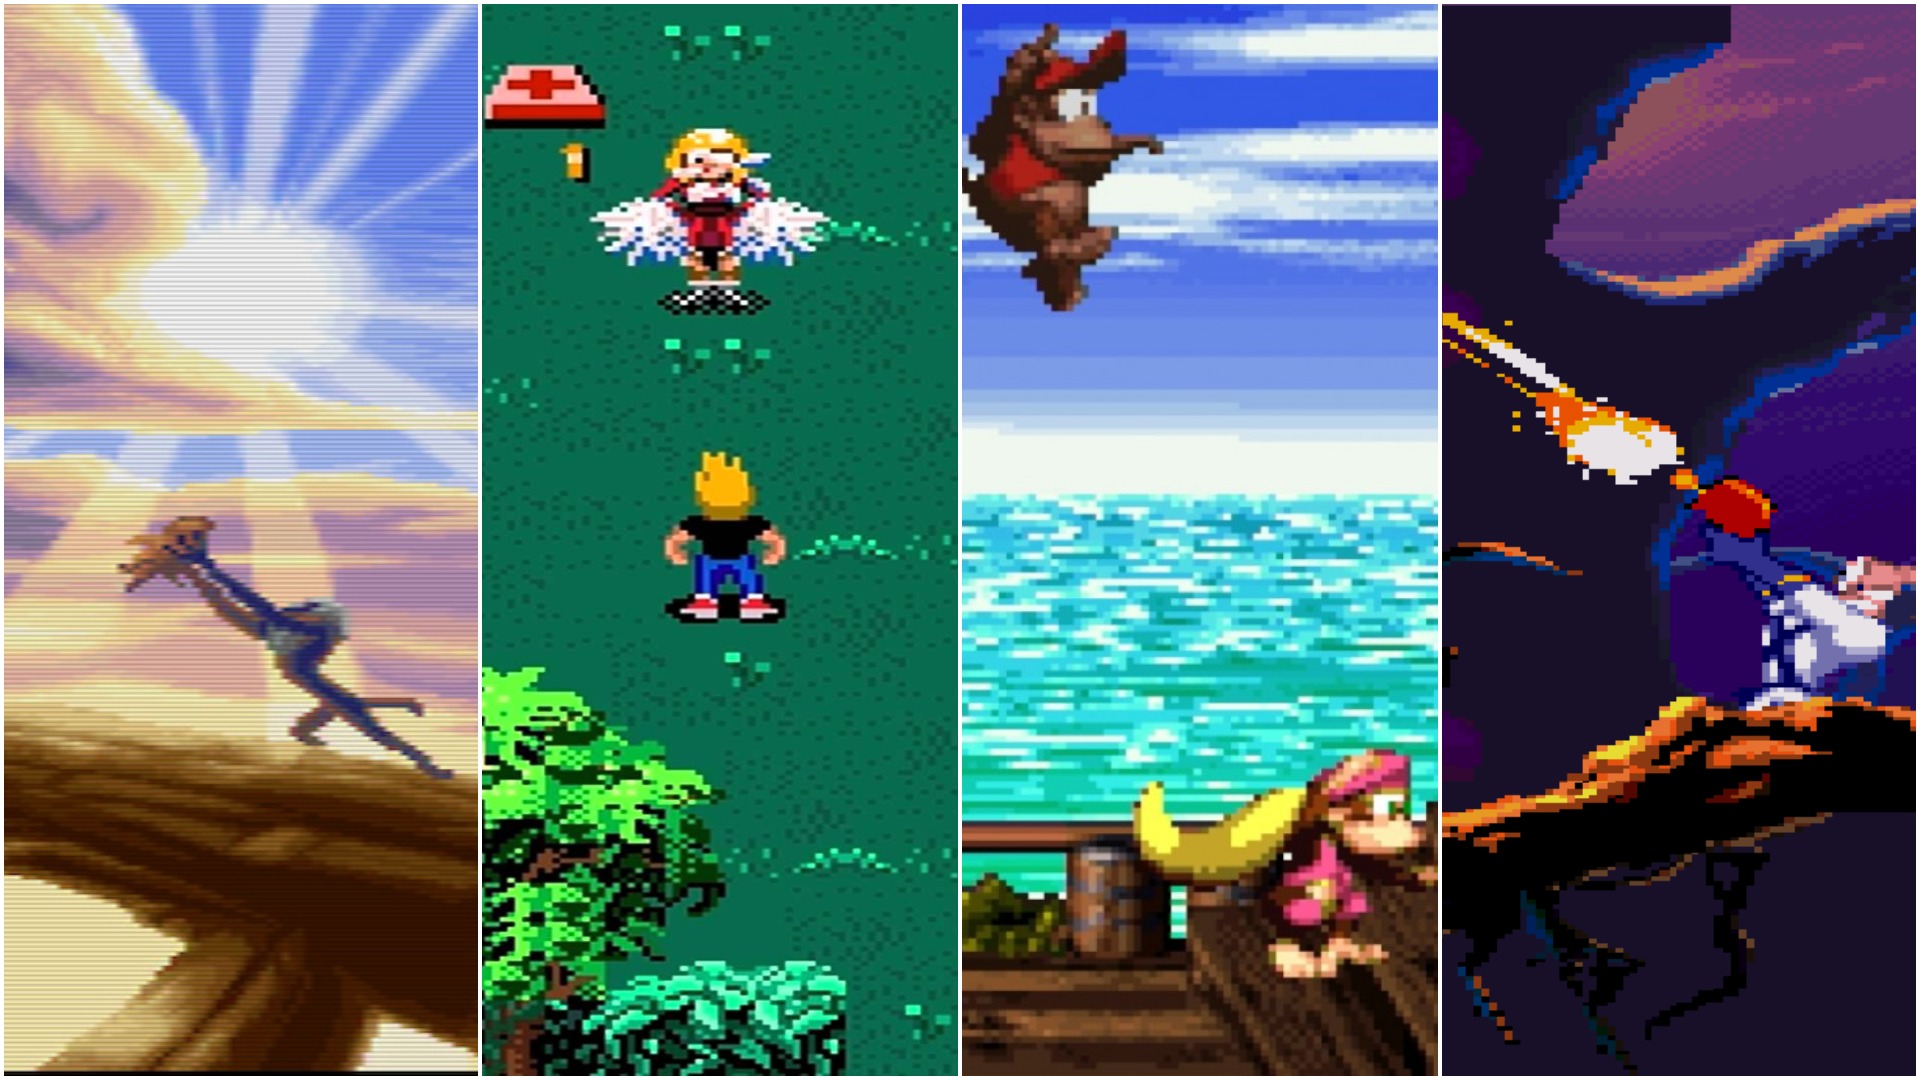 The 20 Hardest Games In the World (That Are Actually Fun, Too